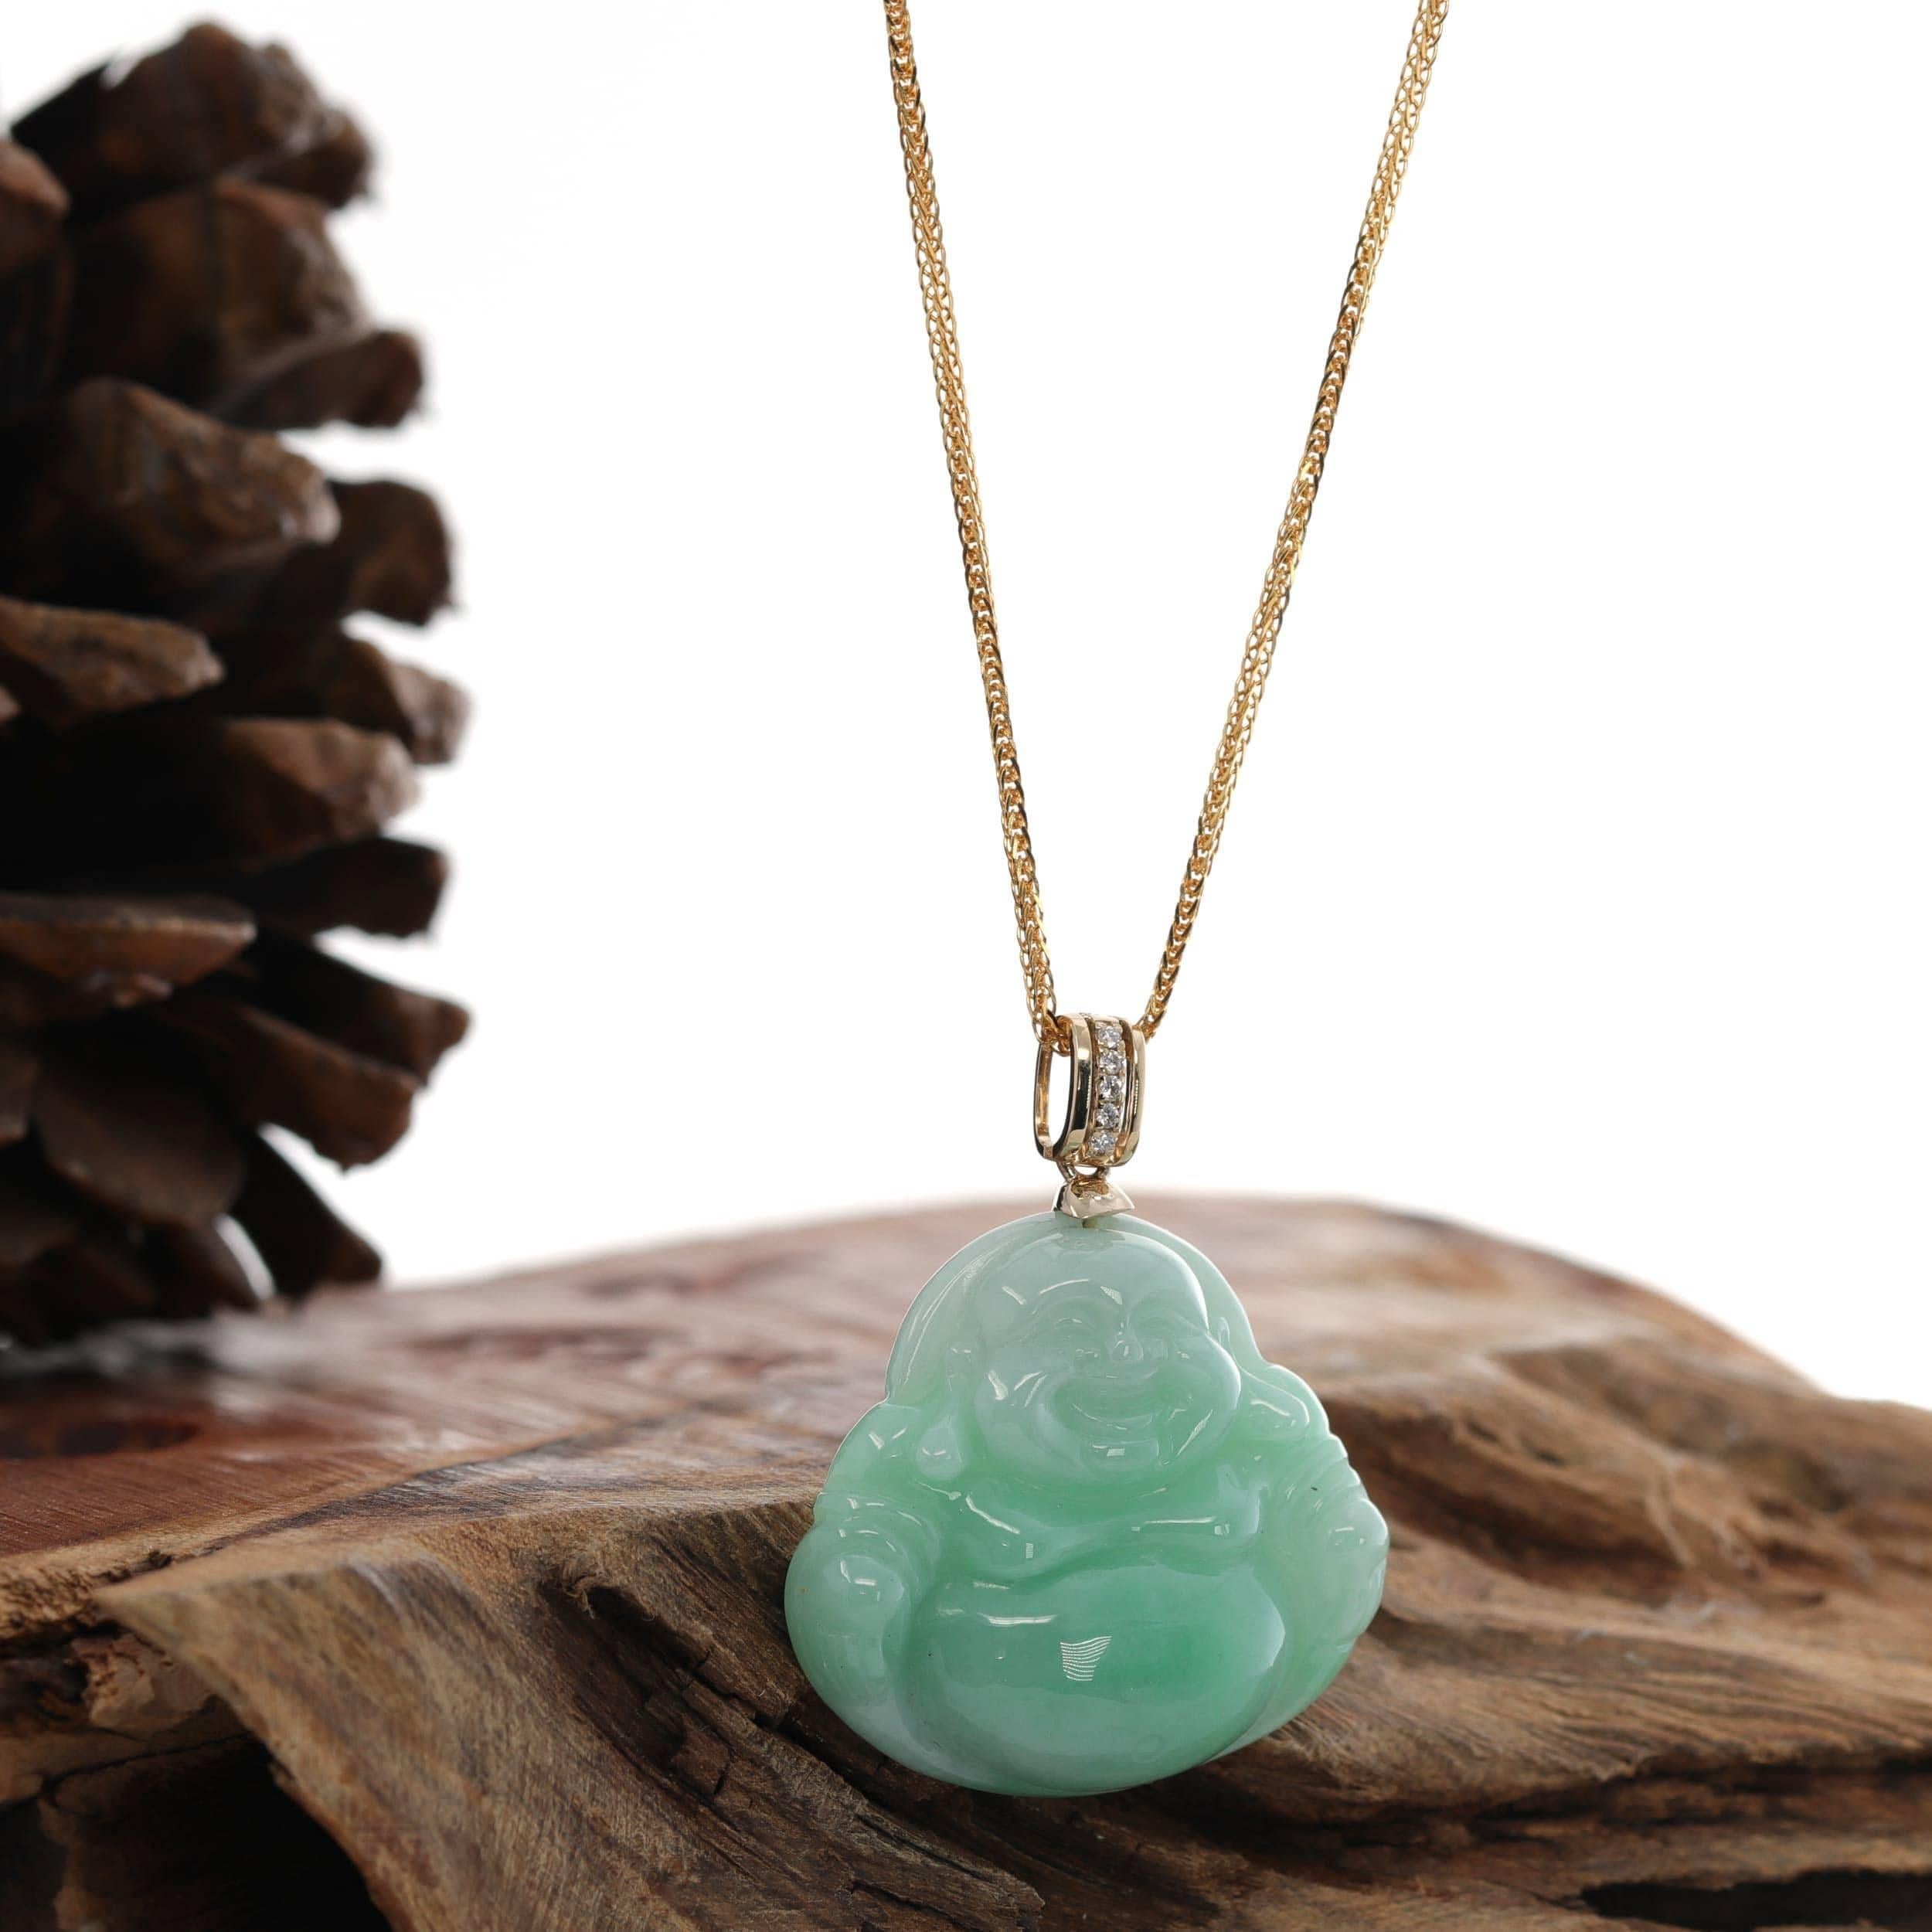 different color buddha necklace meaning